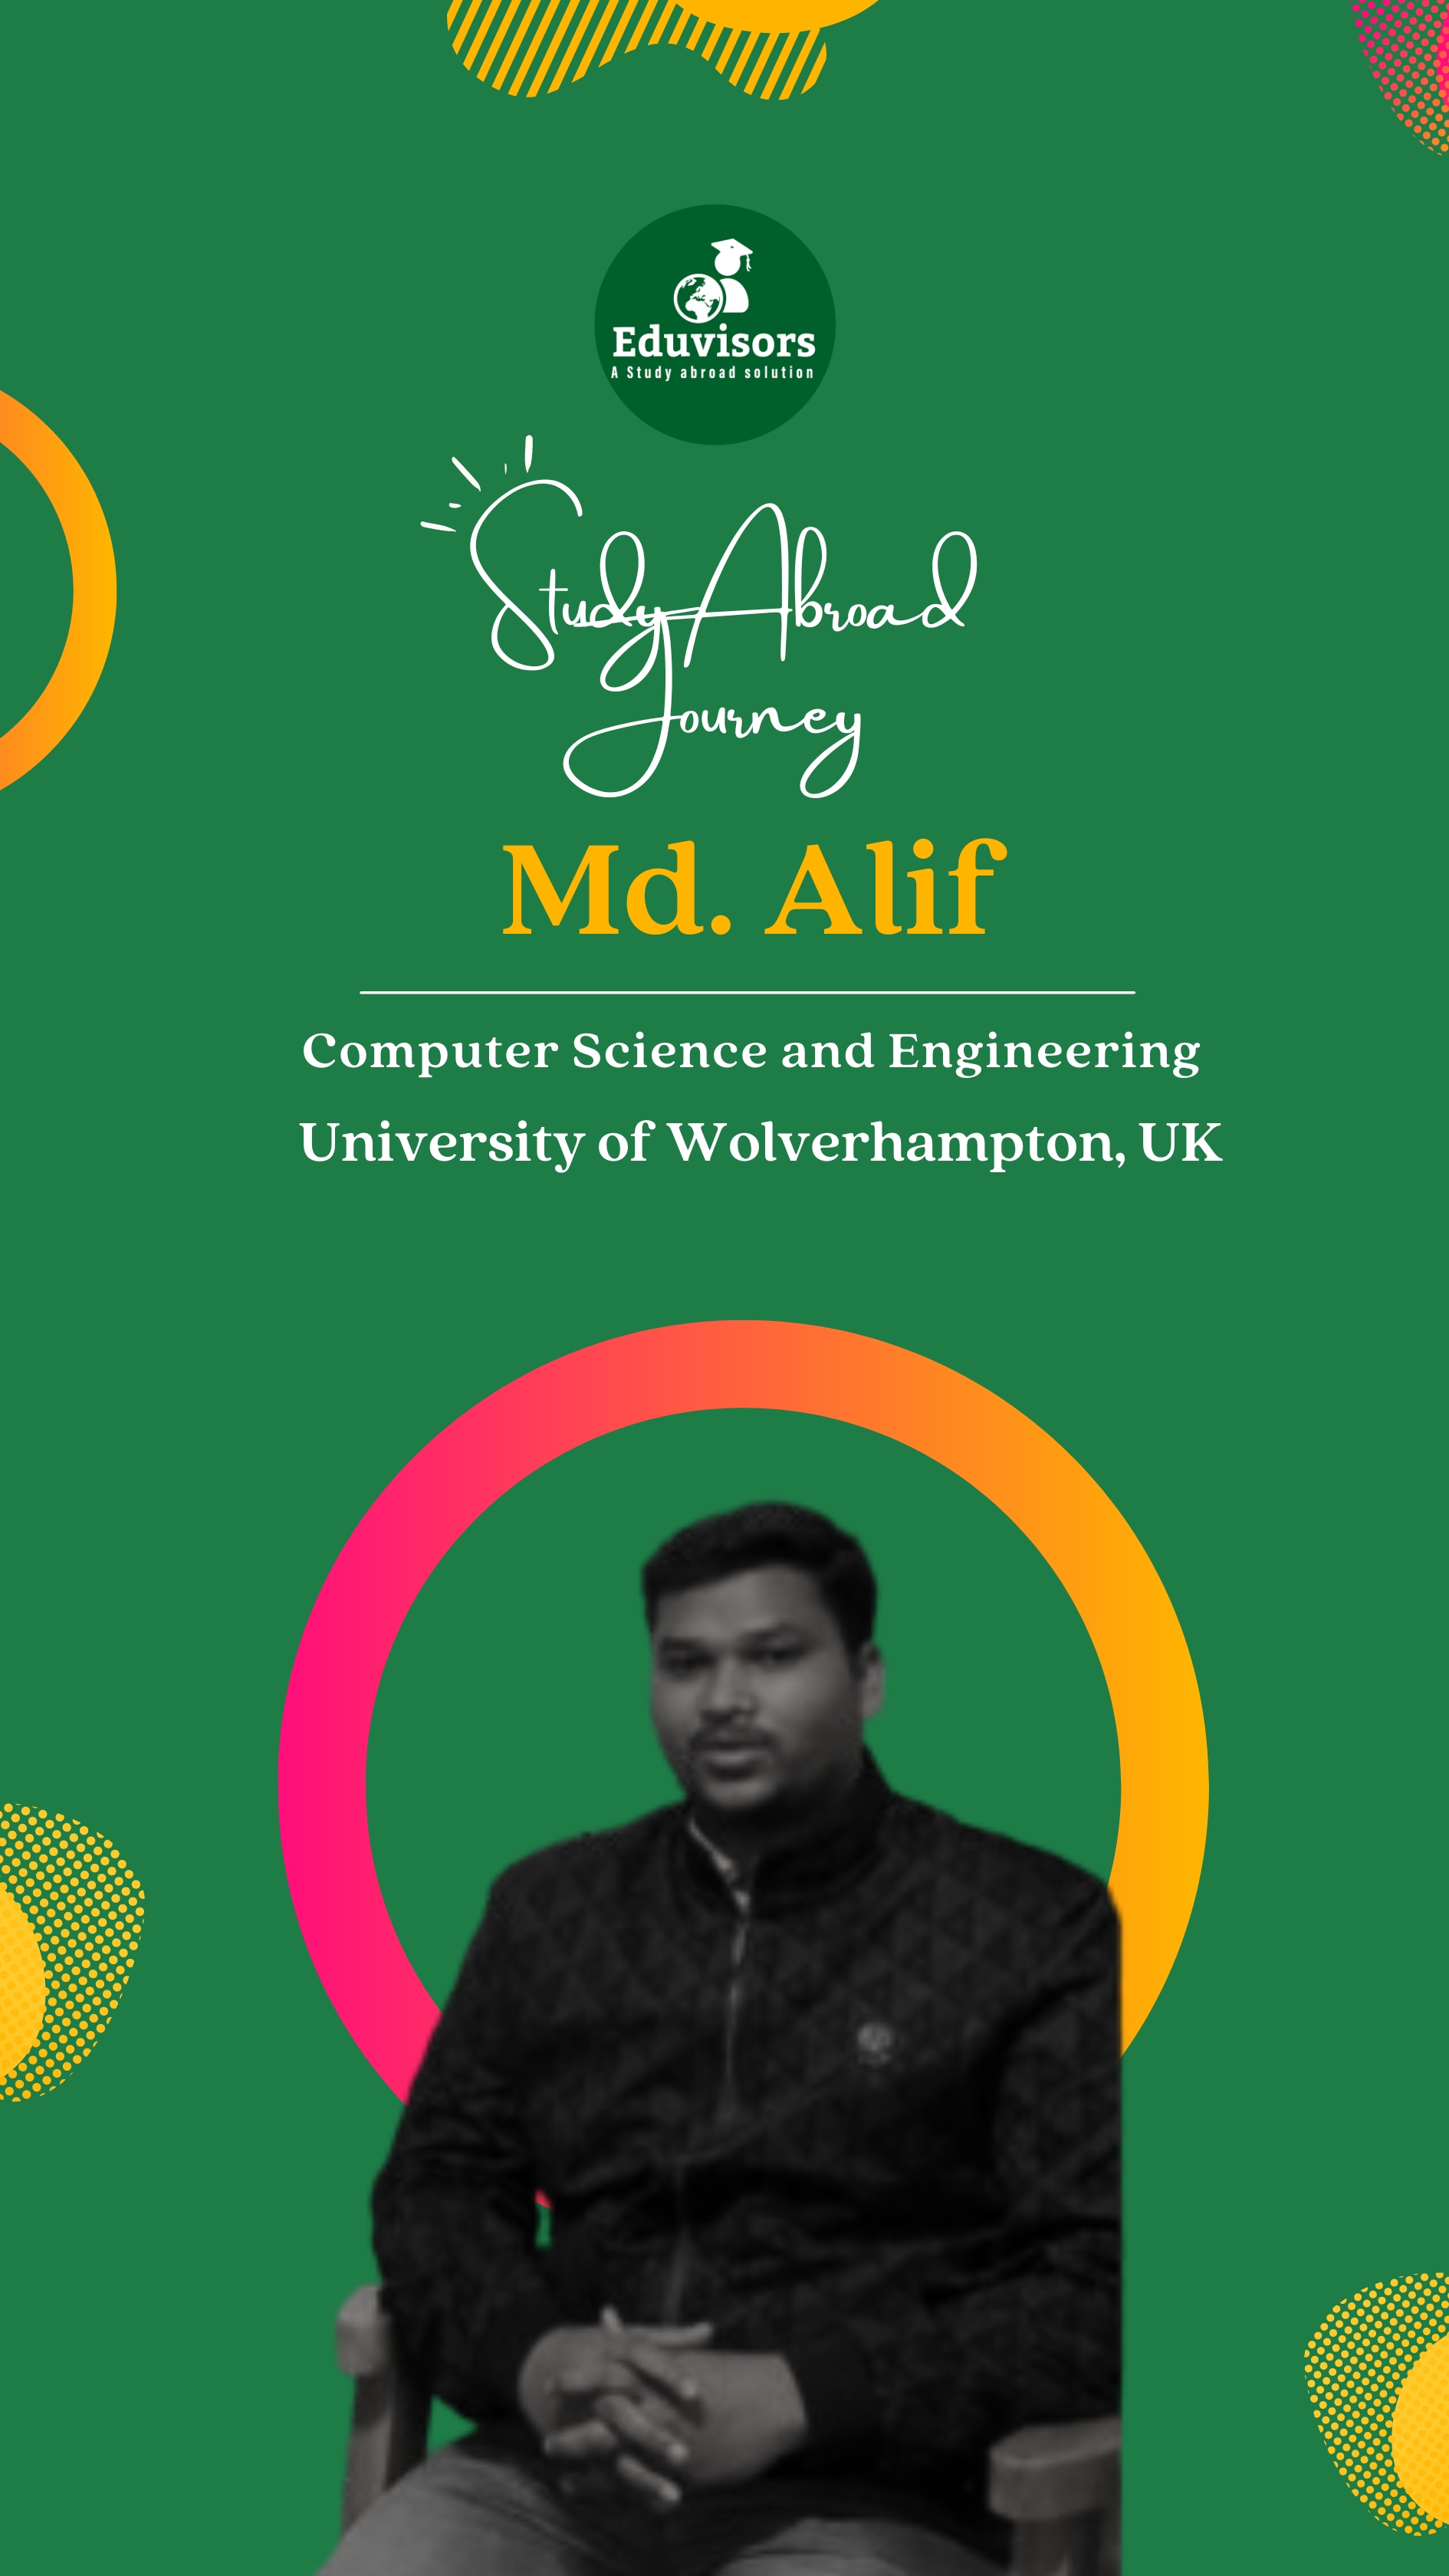 Md. Alif Study Abroad Adventure in the UK with Eduvisors